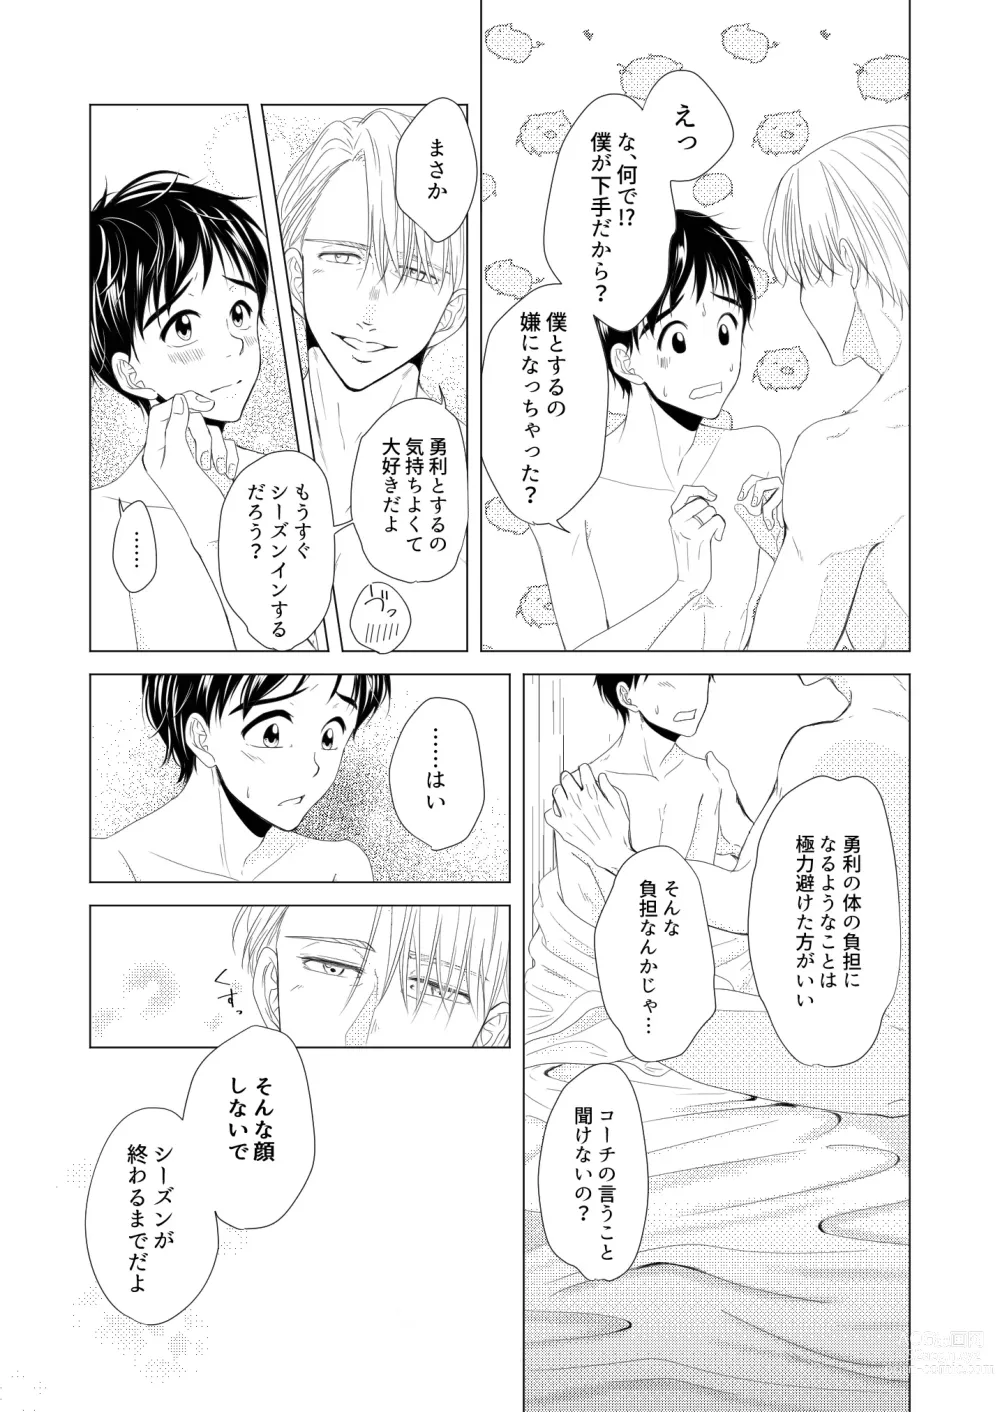 Page 19 of doujinshi Perfect two